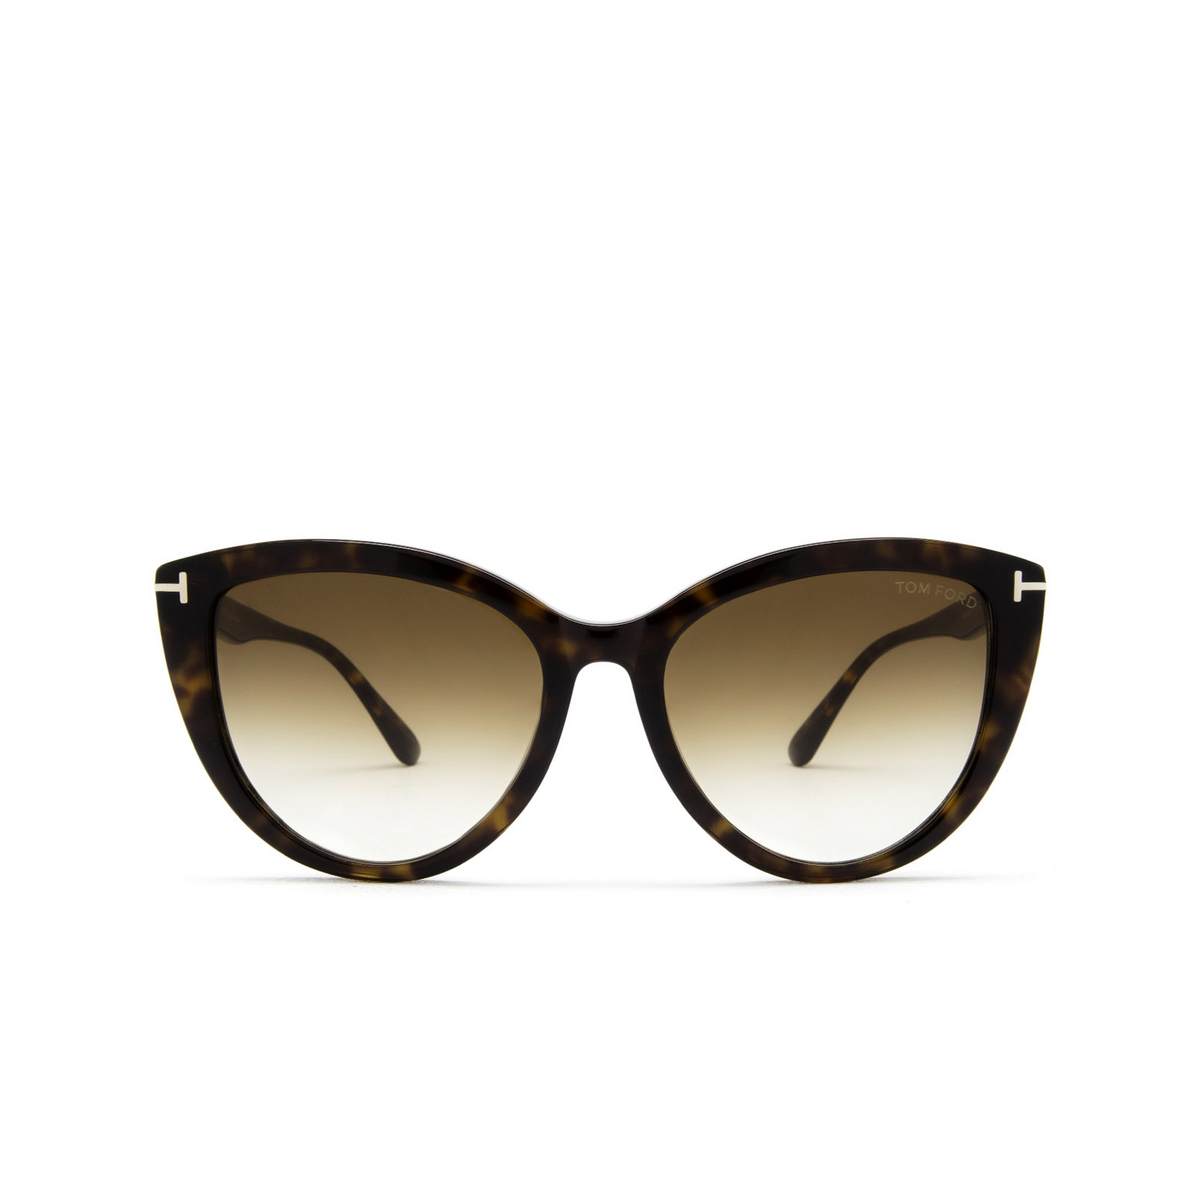 Tom Ford® Cat-eye Sunglasses: Isabella-02 FT0915 color Havana 52F - front view.